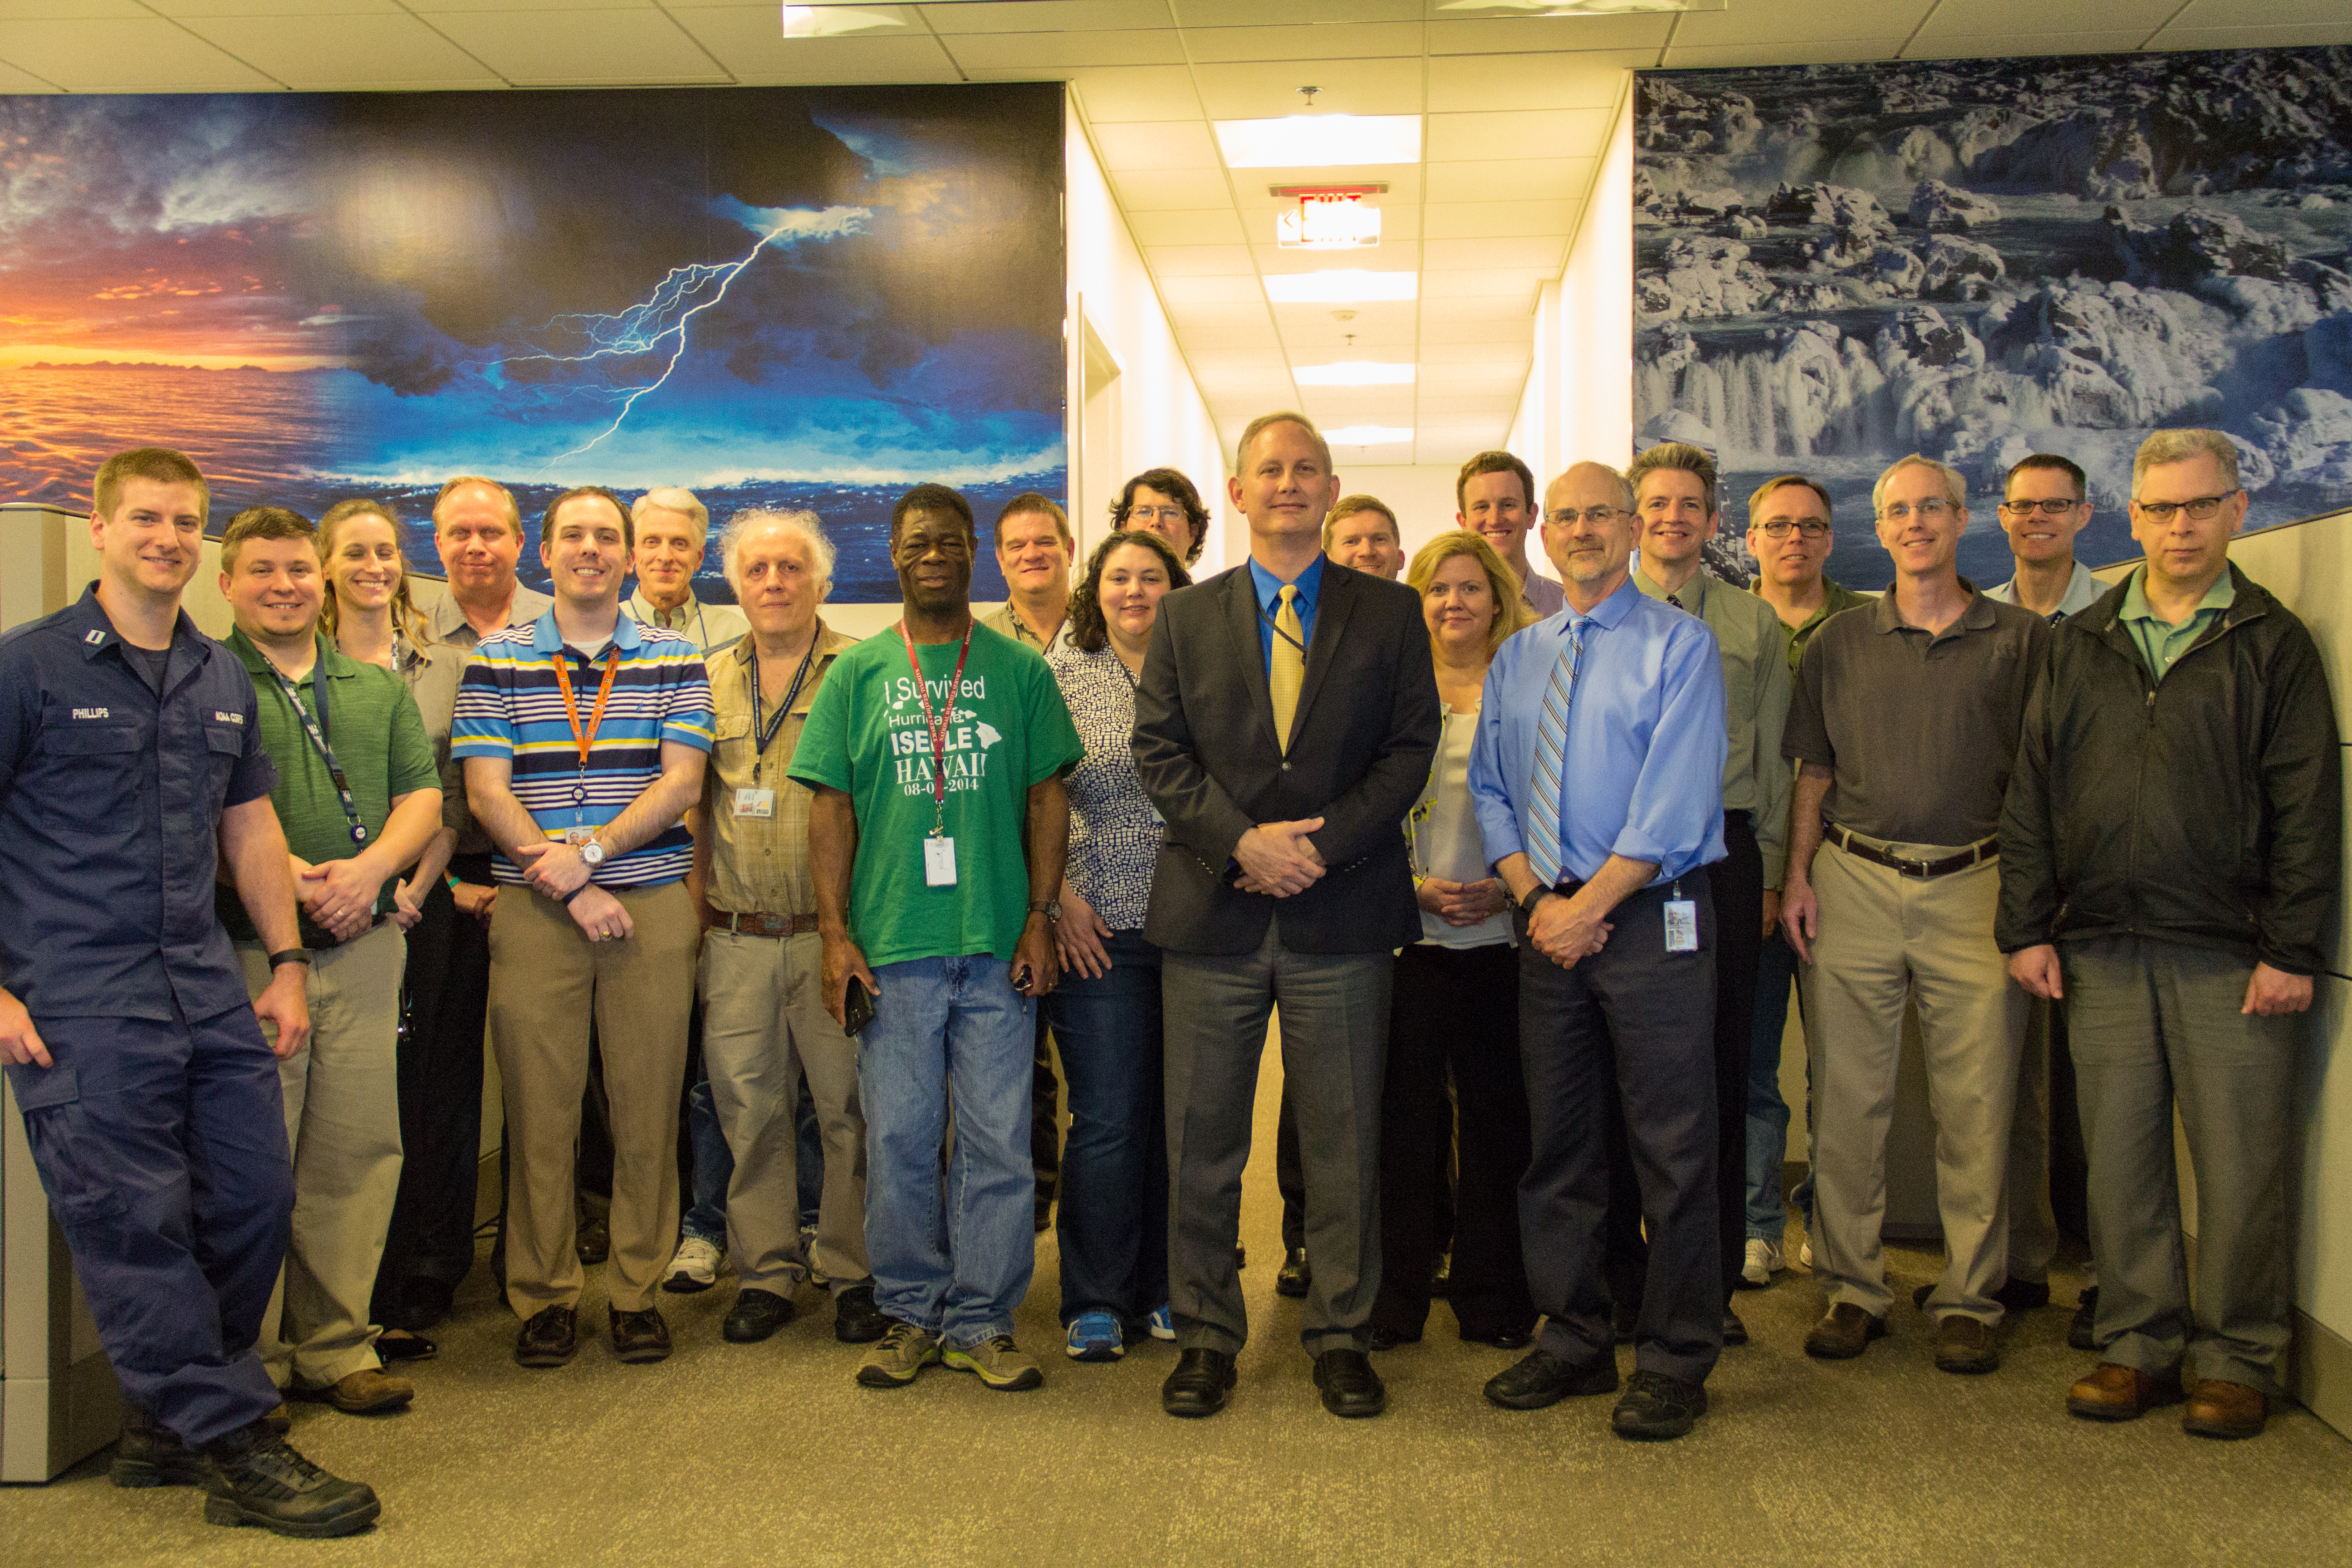 Group photo of Ocean Prediction Center staff memebers on May 25, 2016 in the operational forecast area at the Ocean Prediction Center